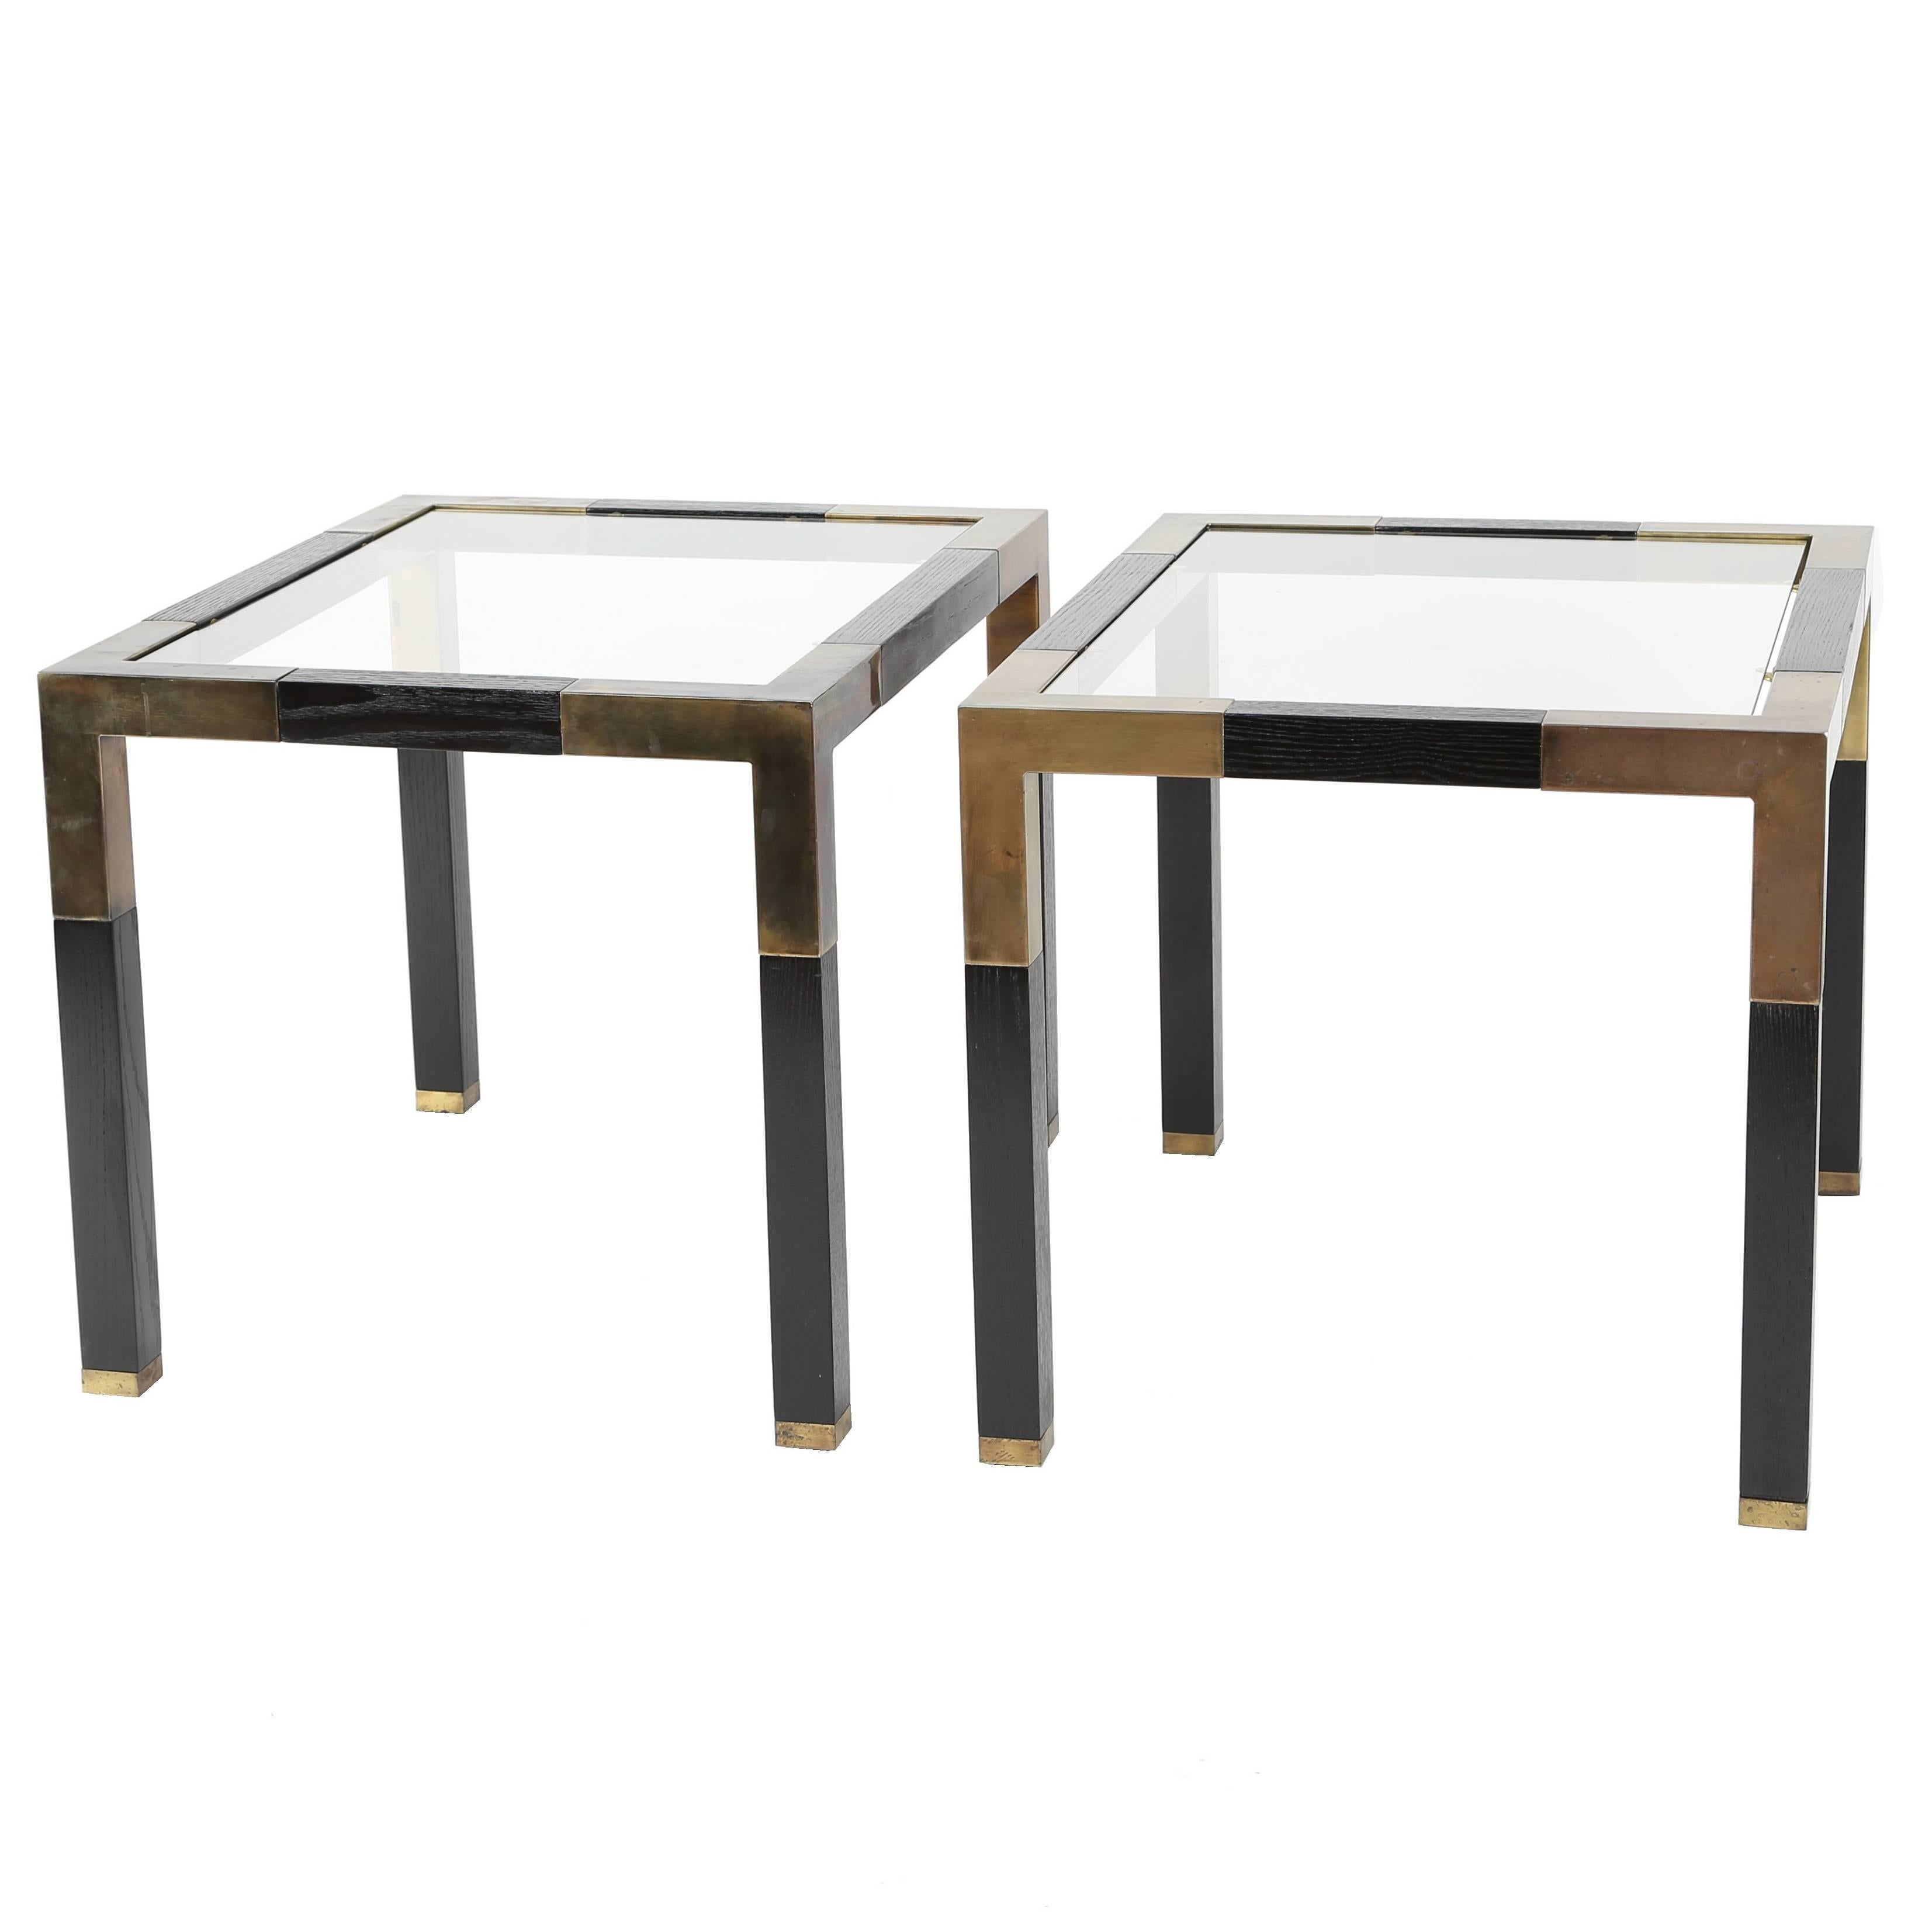 Pair of Patinated-Brass and Dark-Wood Parsons-Style End Tables, circa 1970s